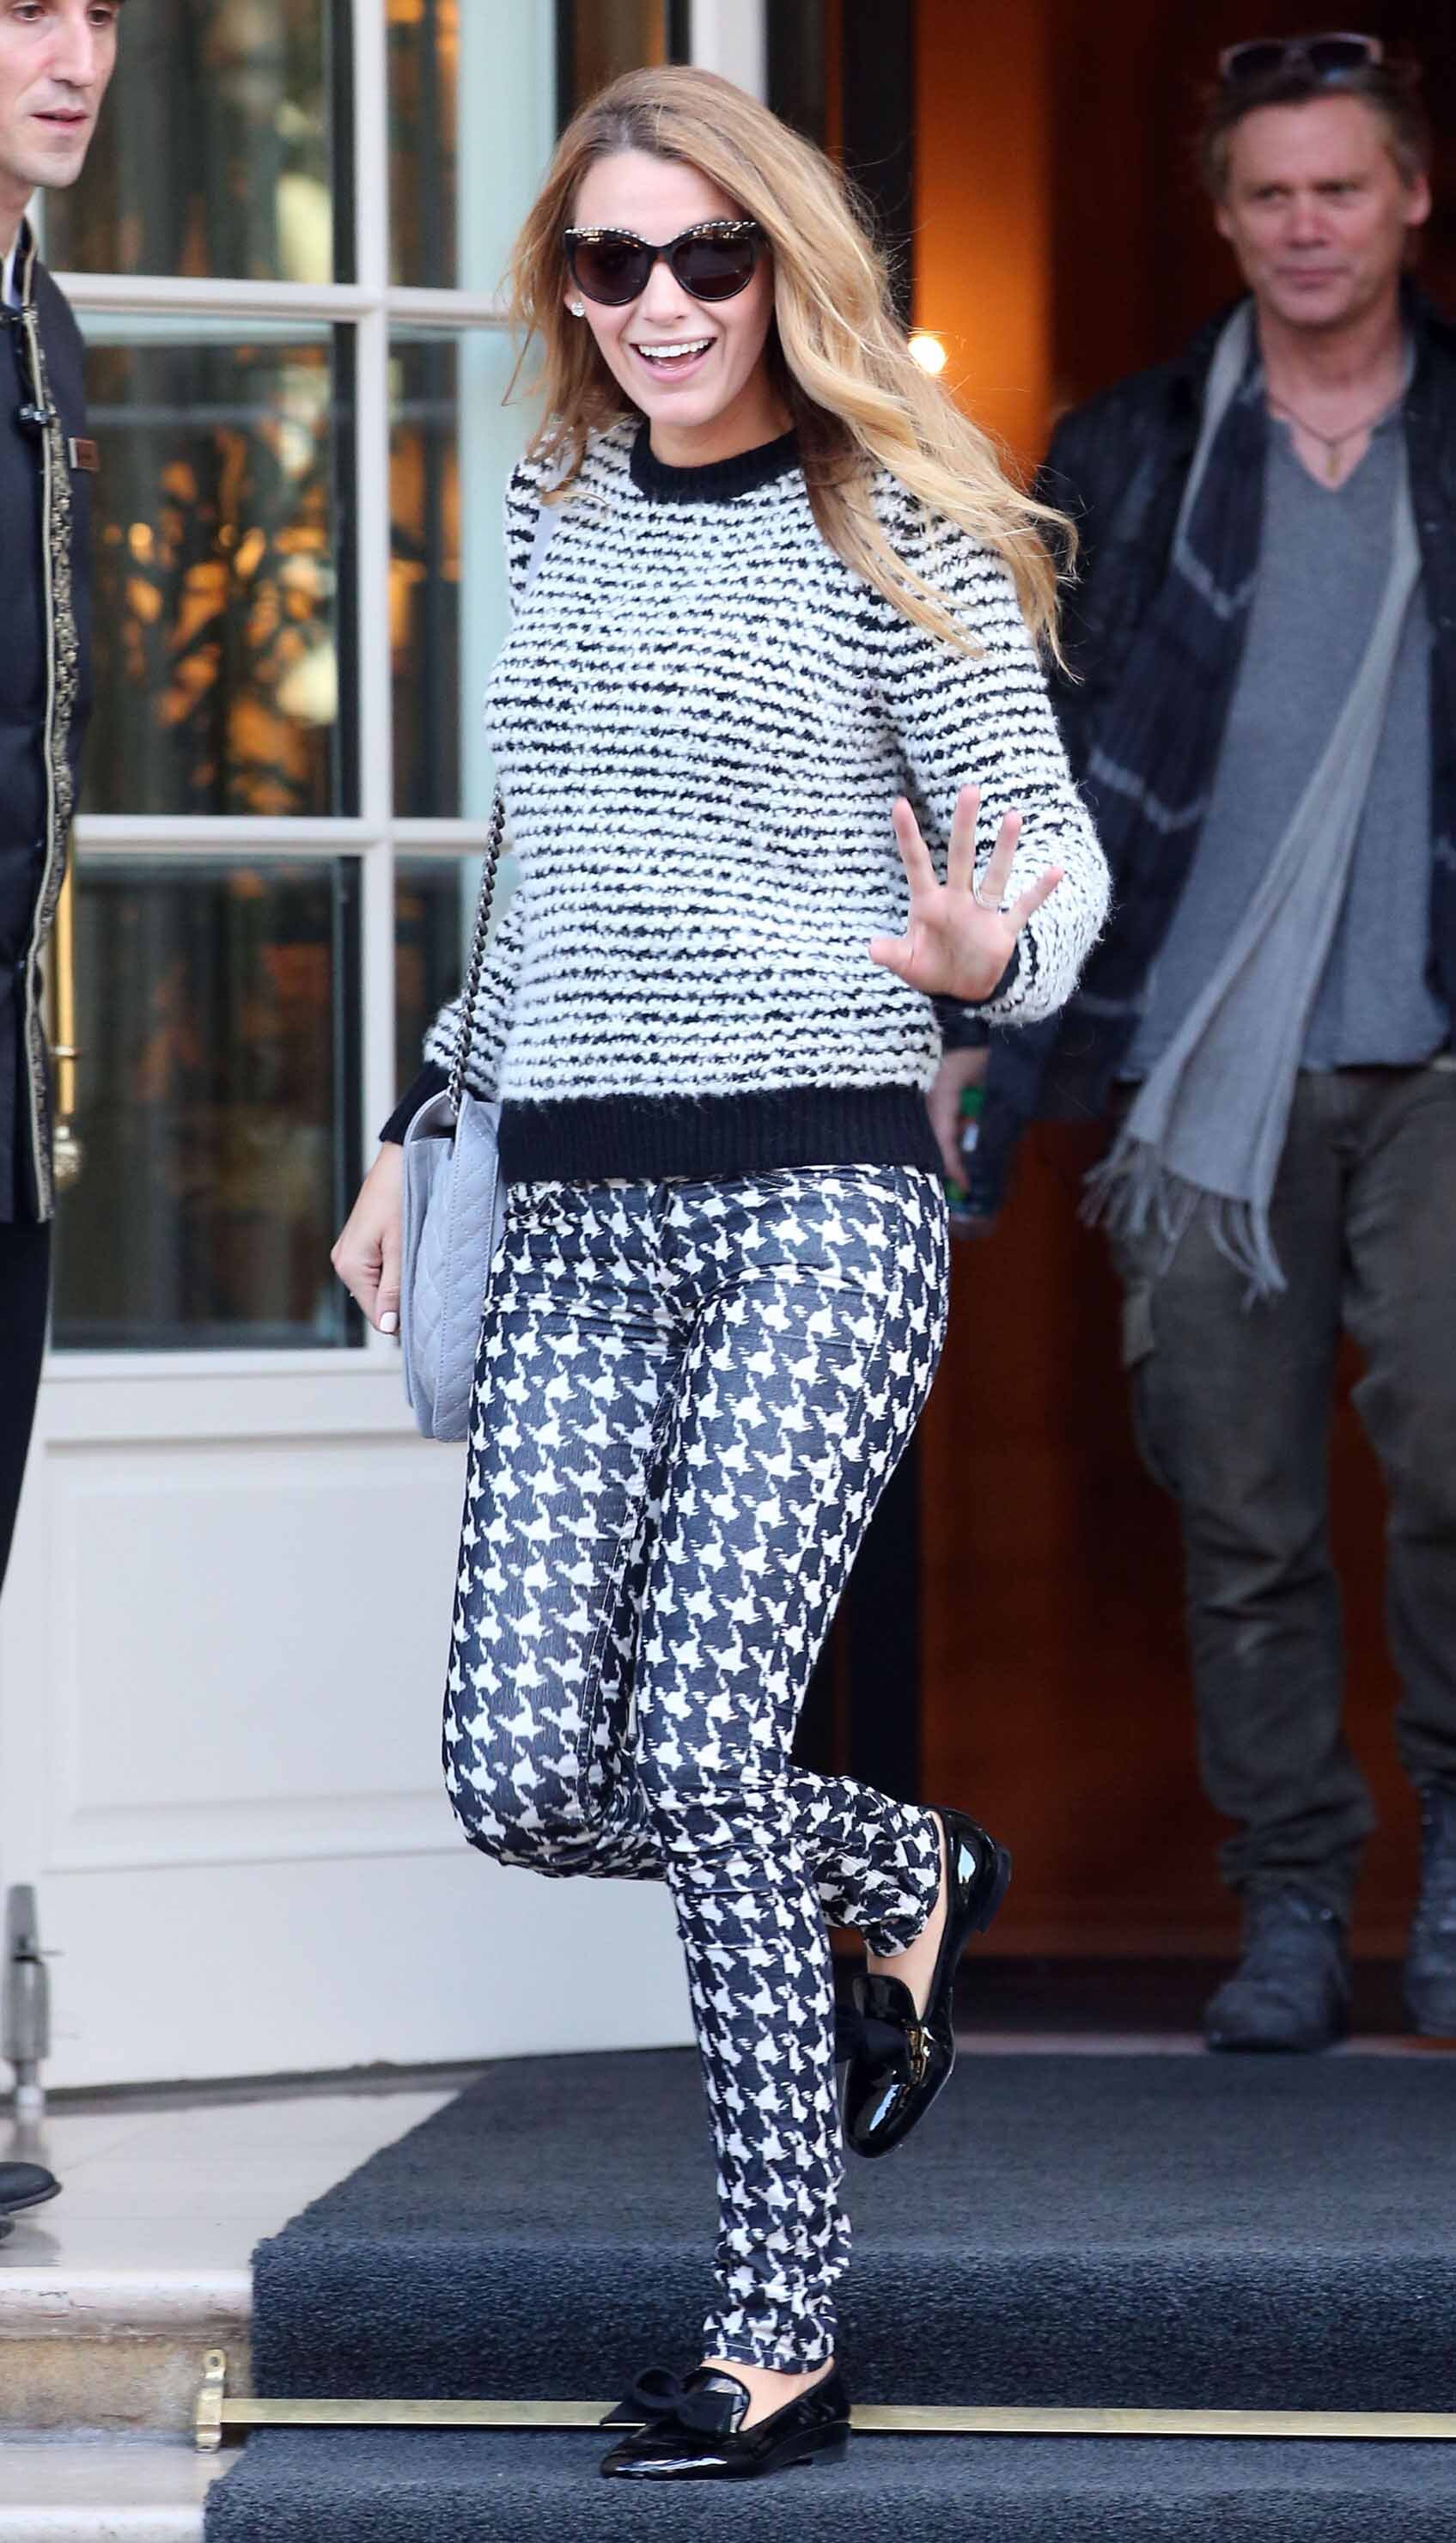 black-skinny-jeans-houndstooth-print-mix-white-sweater-sun-black-shoe-loafers-gray-bag-blonde-blakelively-fall-winter-weekend.jpg